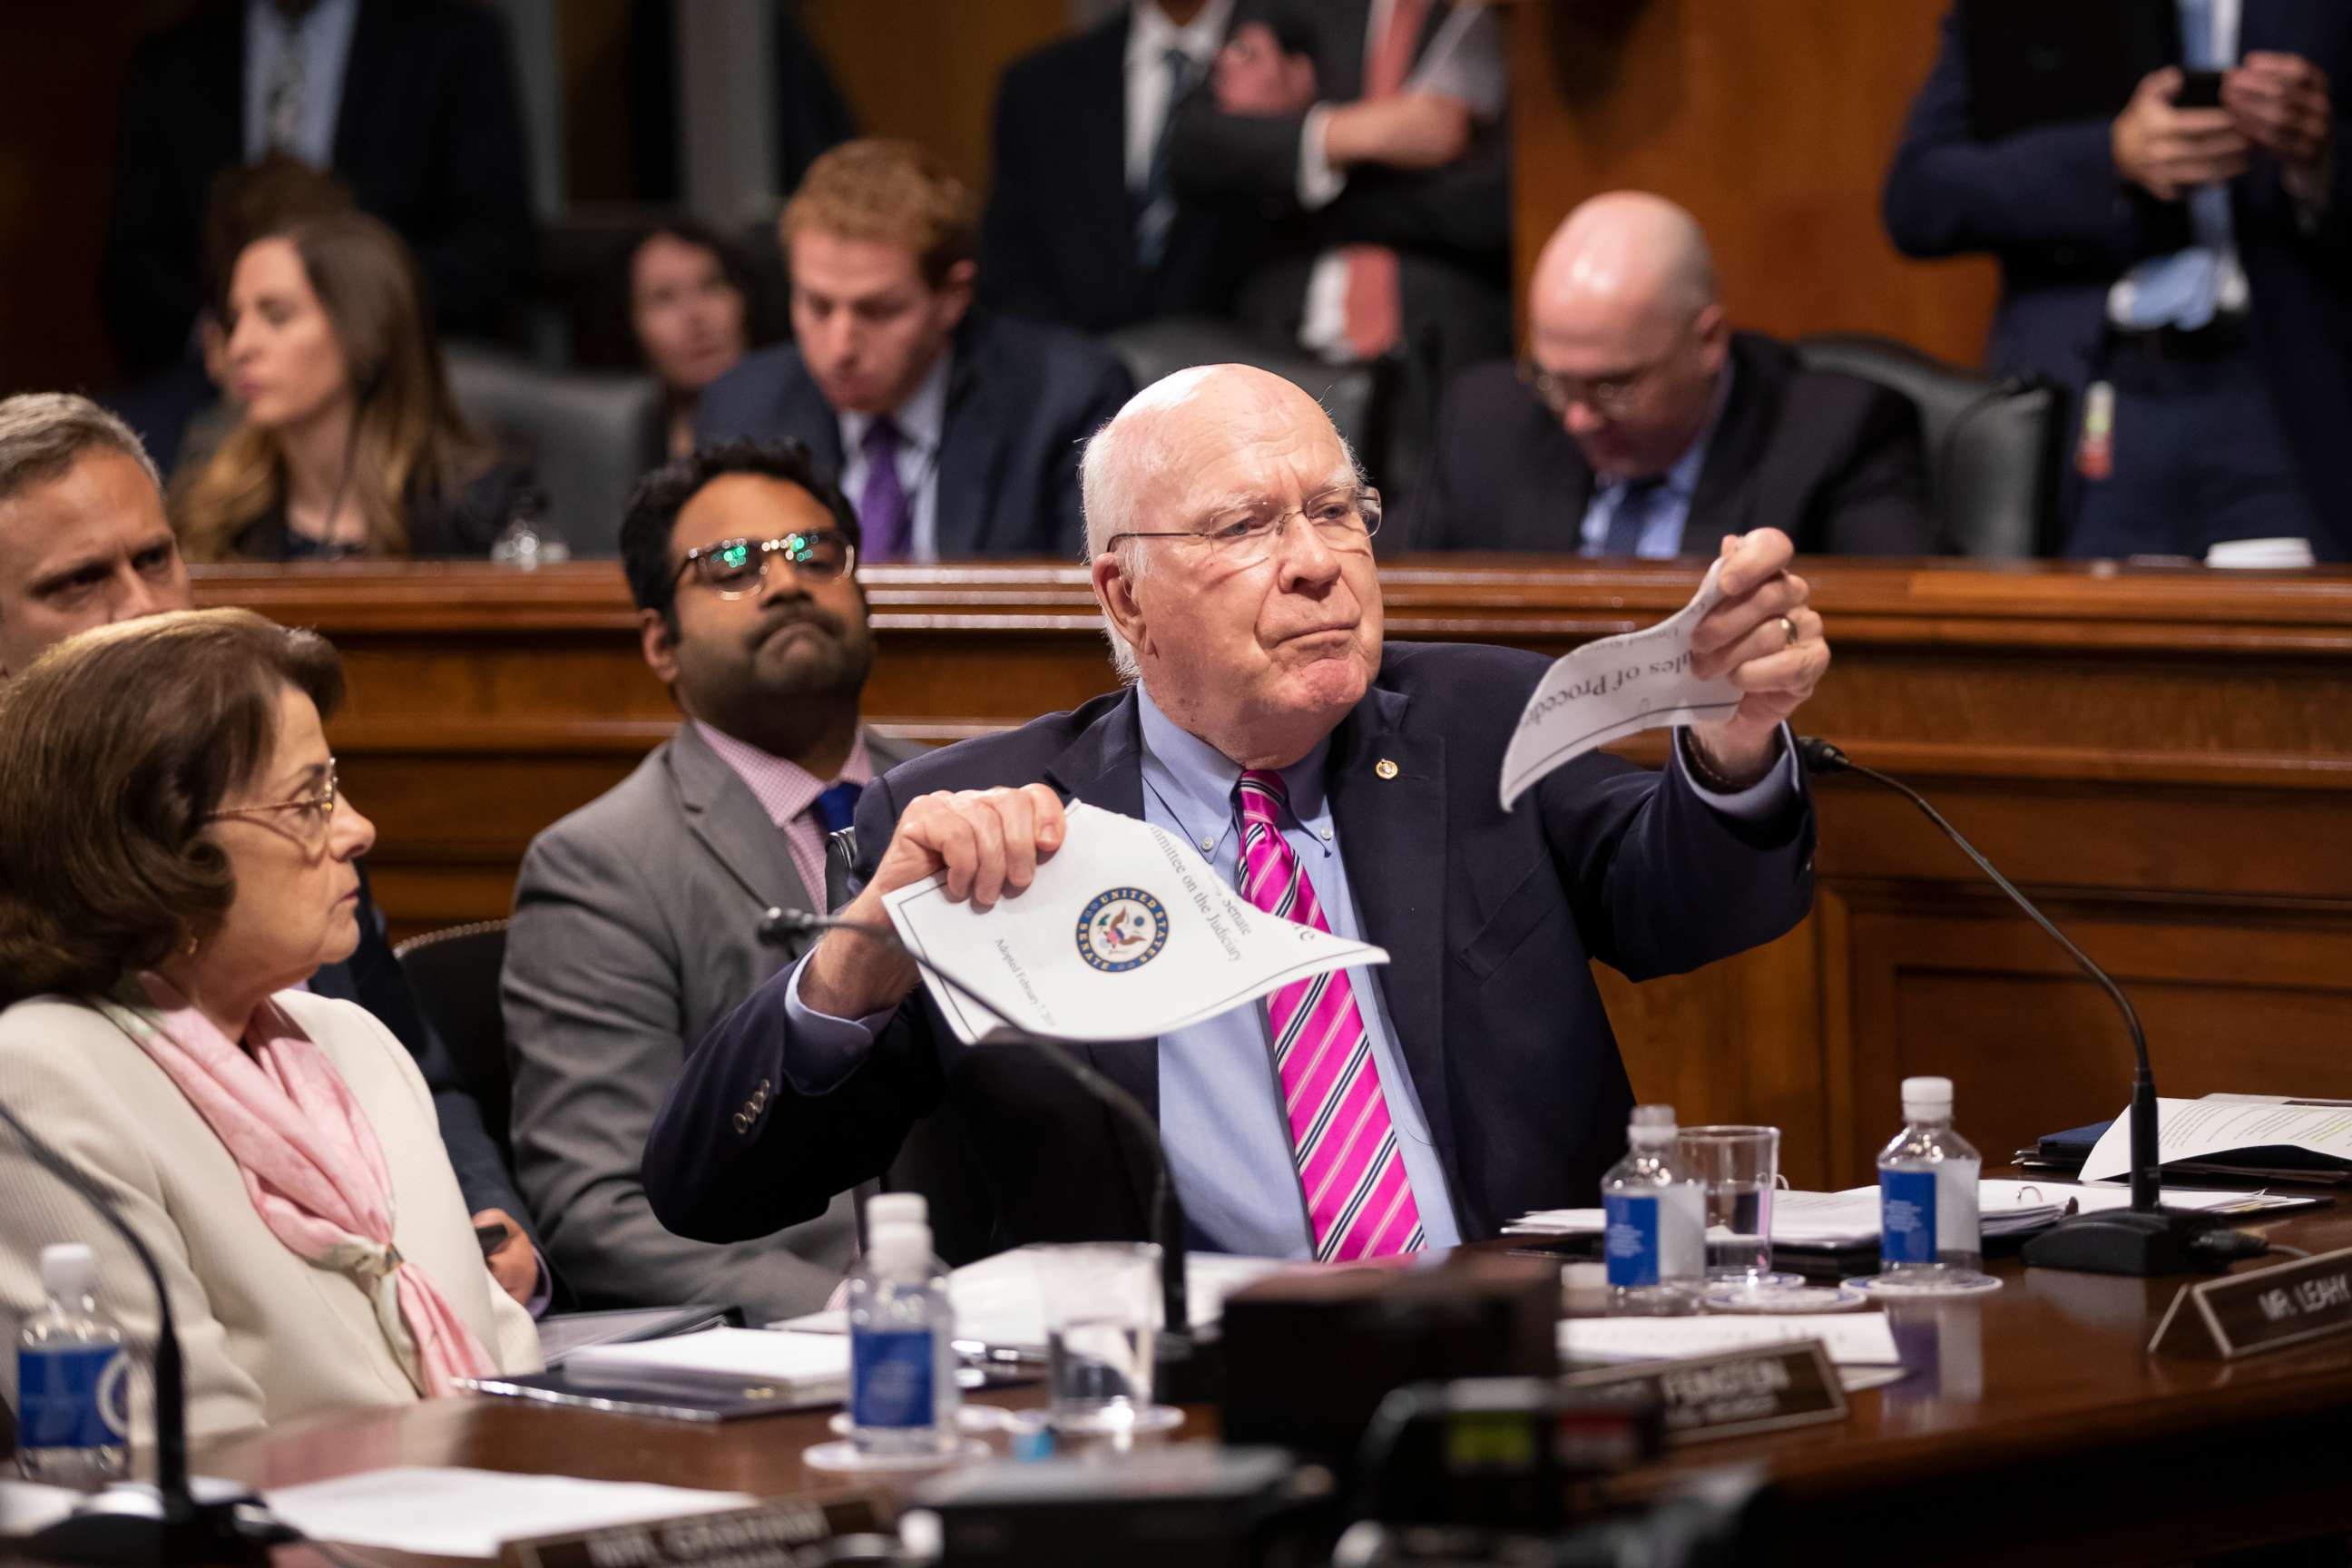 PHOTO: Sen. Patrick Leahy, a former chairman of the Senate Judiciary Committee, rips a copy of the committee rules of procedure on Capitol Hill in Washington, Aug. 1, 2019.